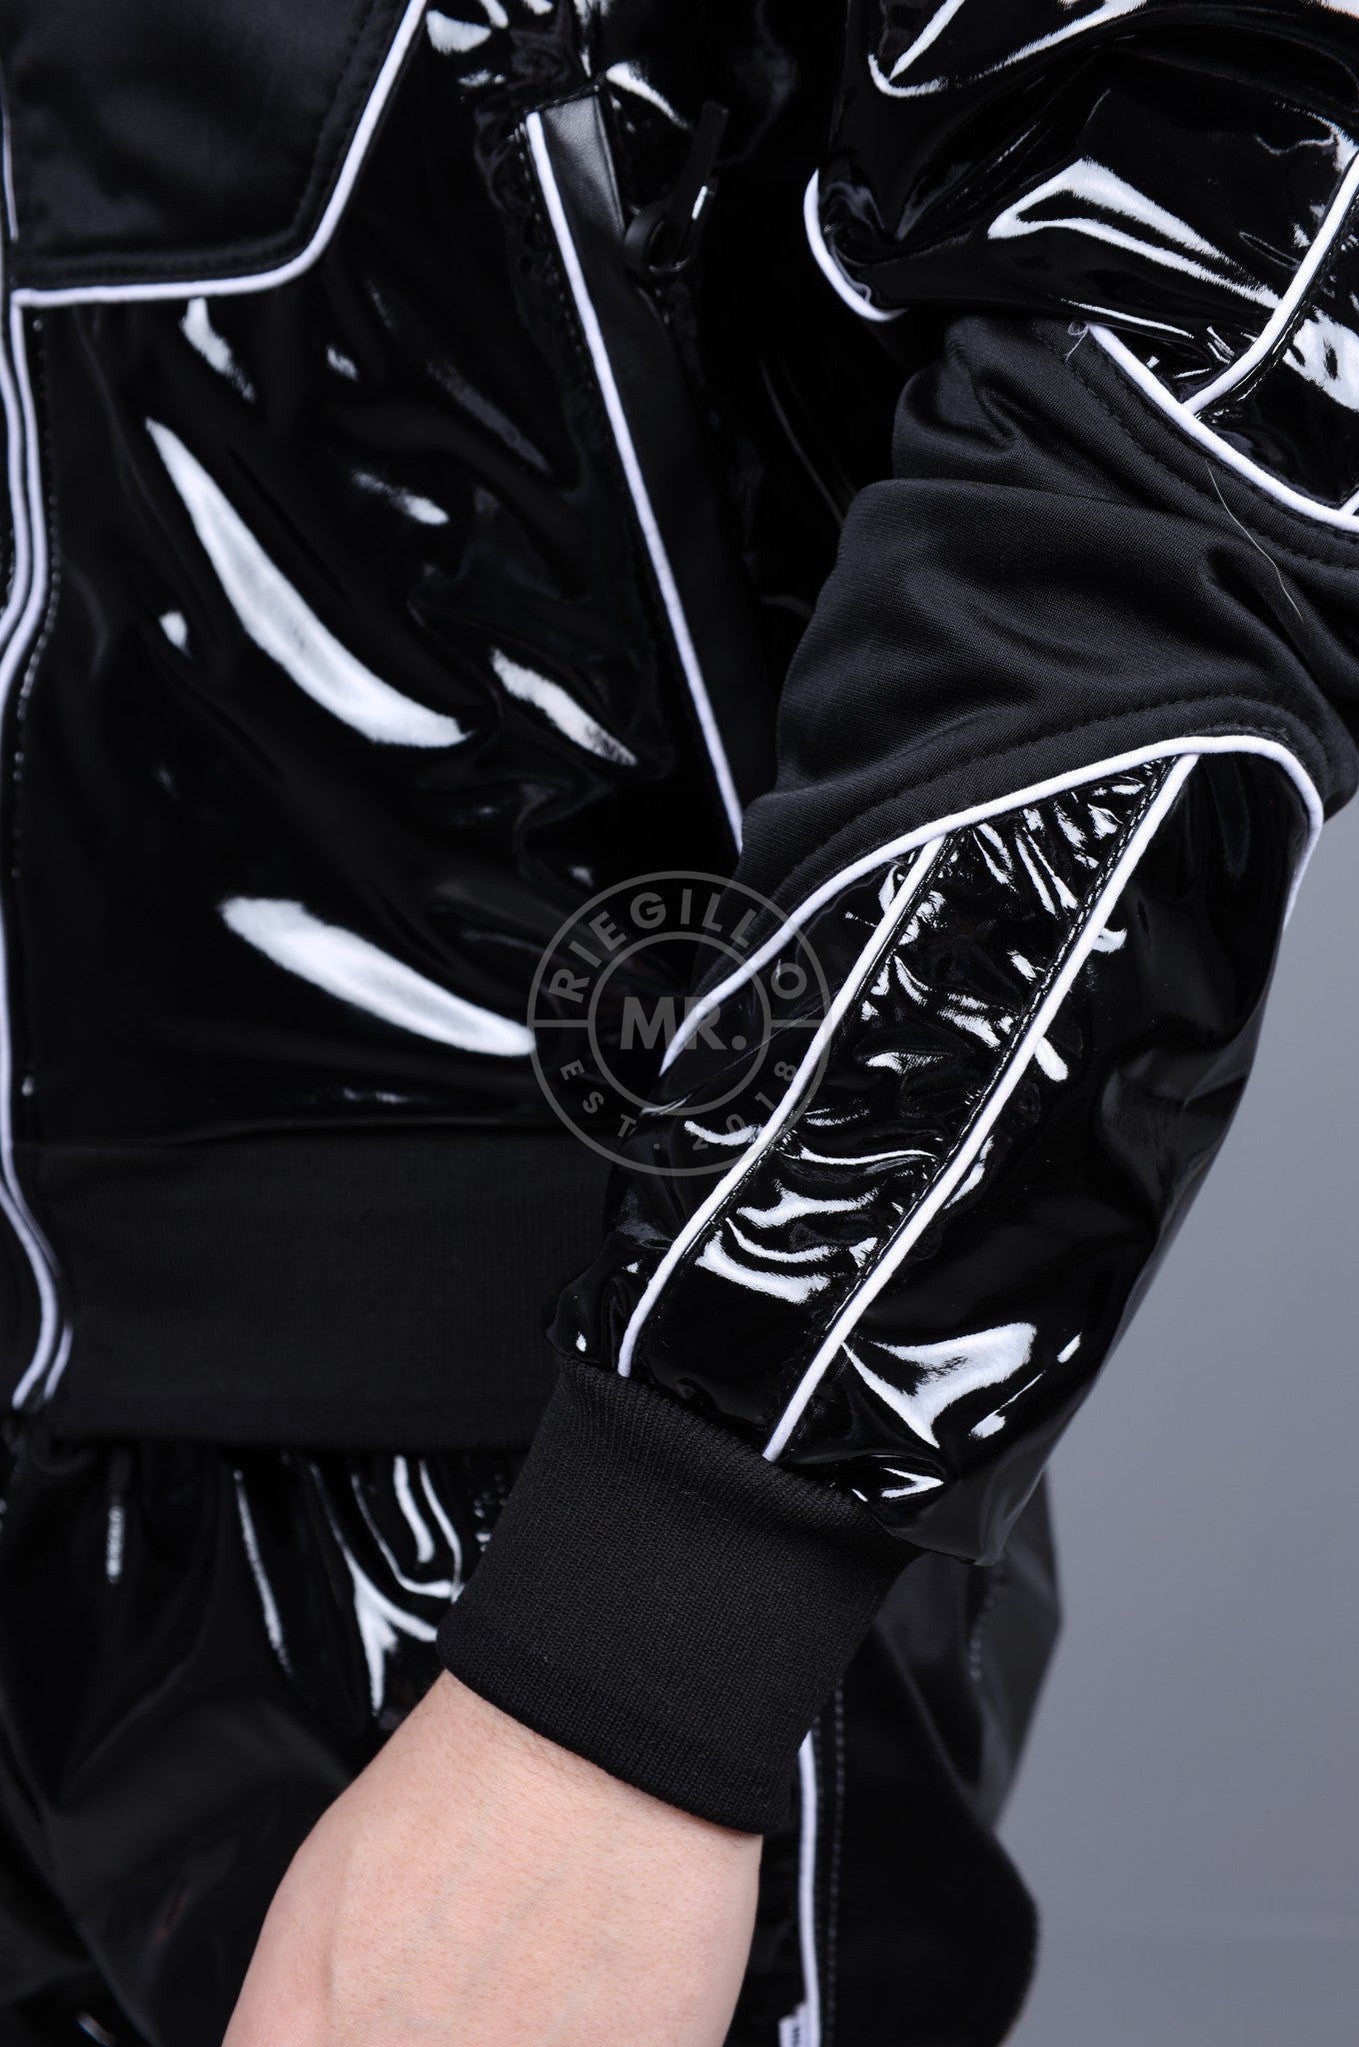 PVC 24 Tracksuit Jacket - Black with White Piping-at MR. Riegillio